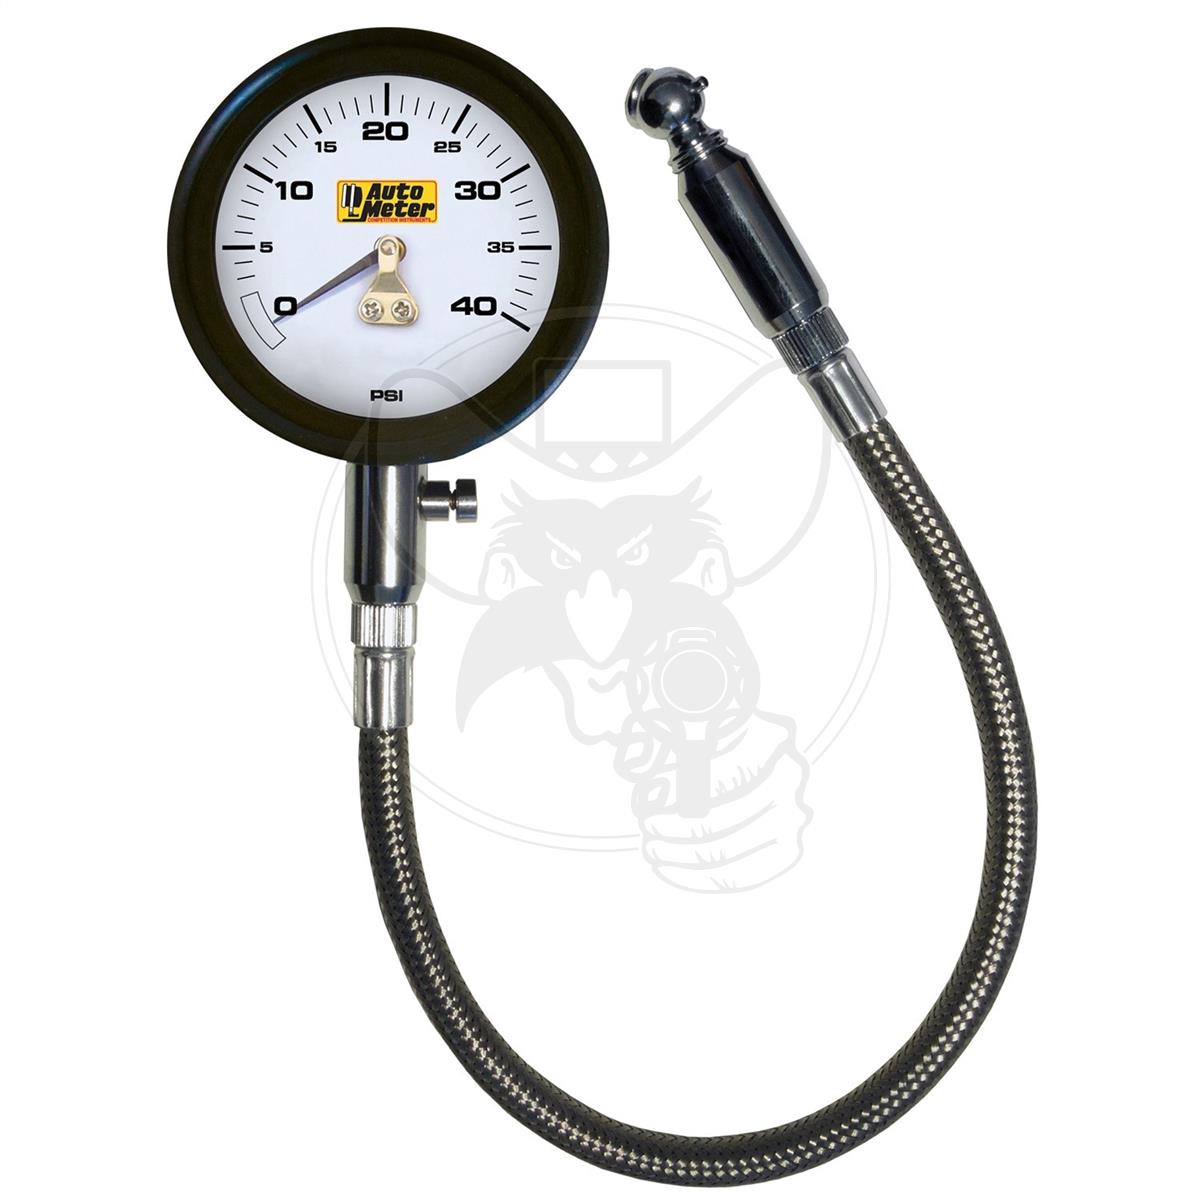 Light Weight with Discharge Valve Heavy Duty Car & Motorbike with Flexible Hose Chucks 60 PSI Compact Size NUZAMAS 2 Dial Premium Tyre Pressure Gauge 